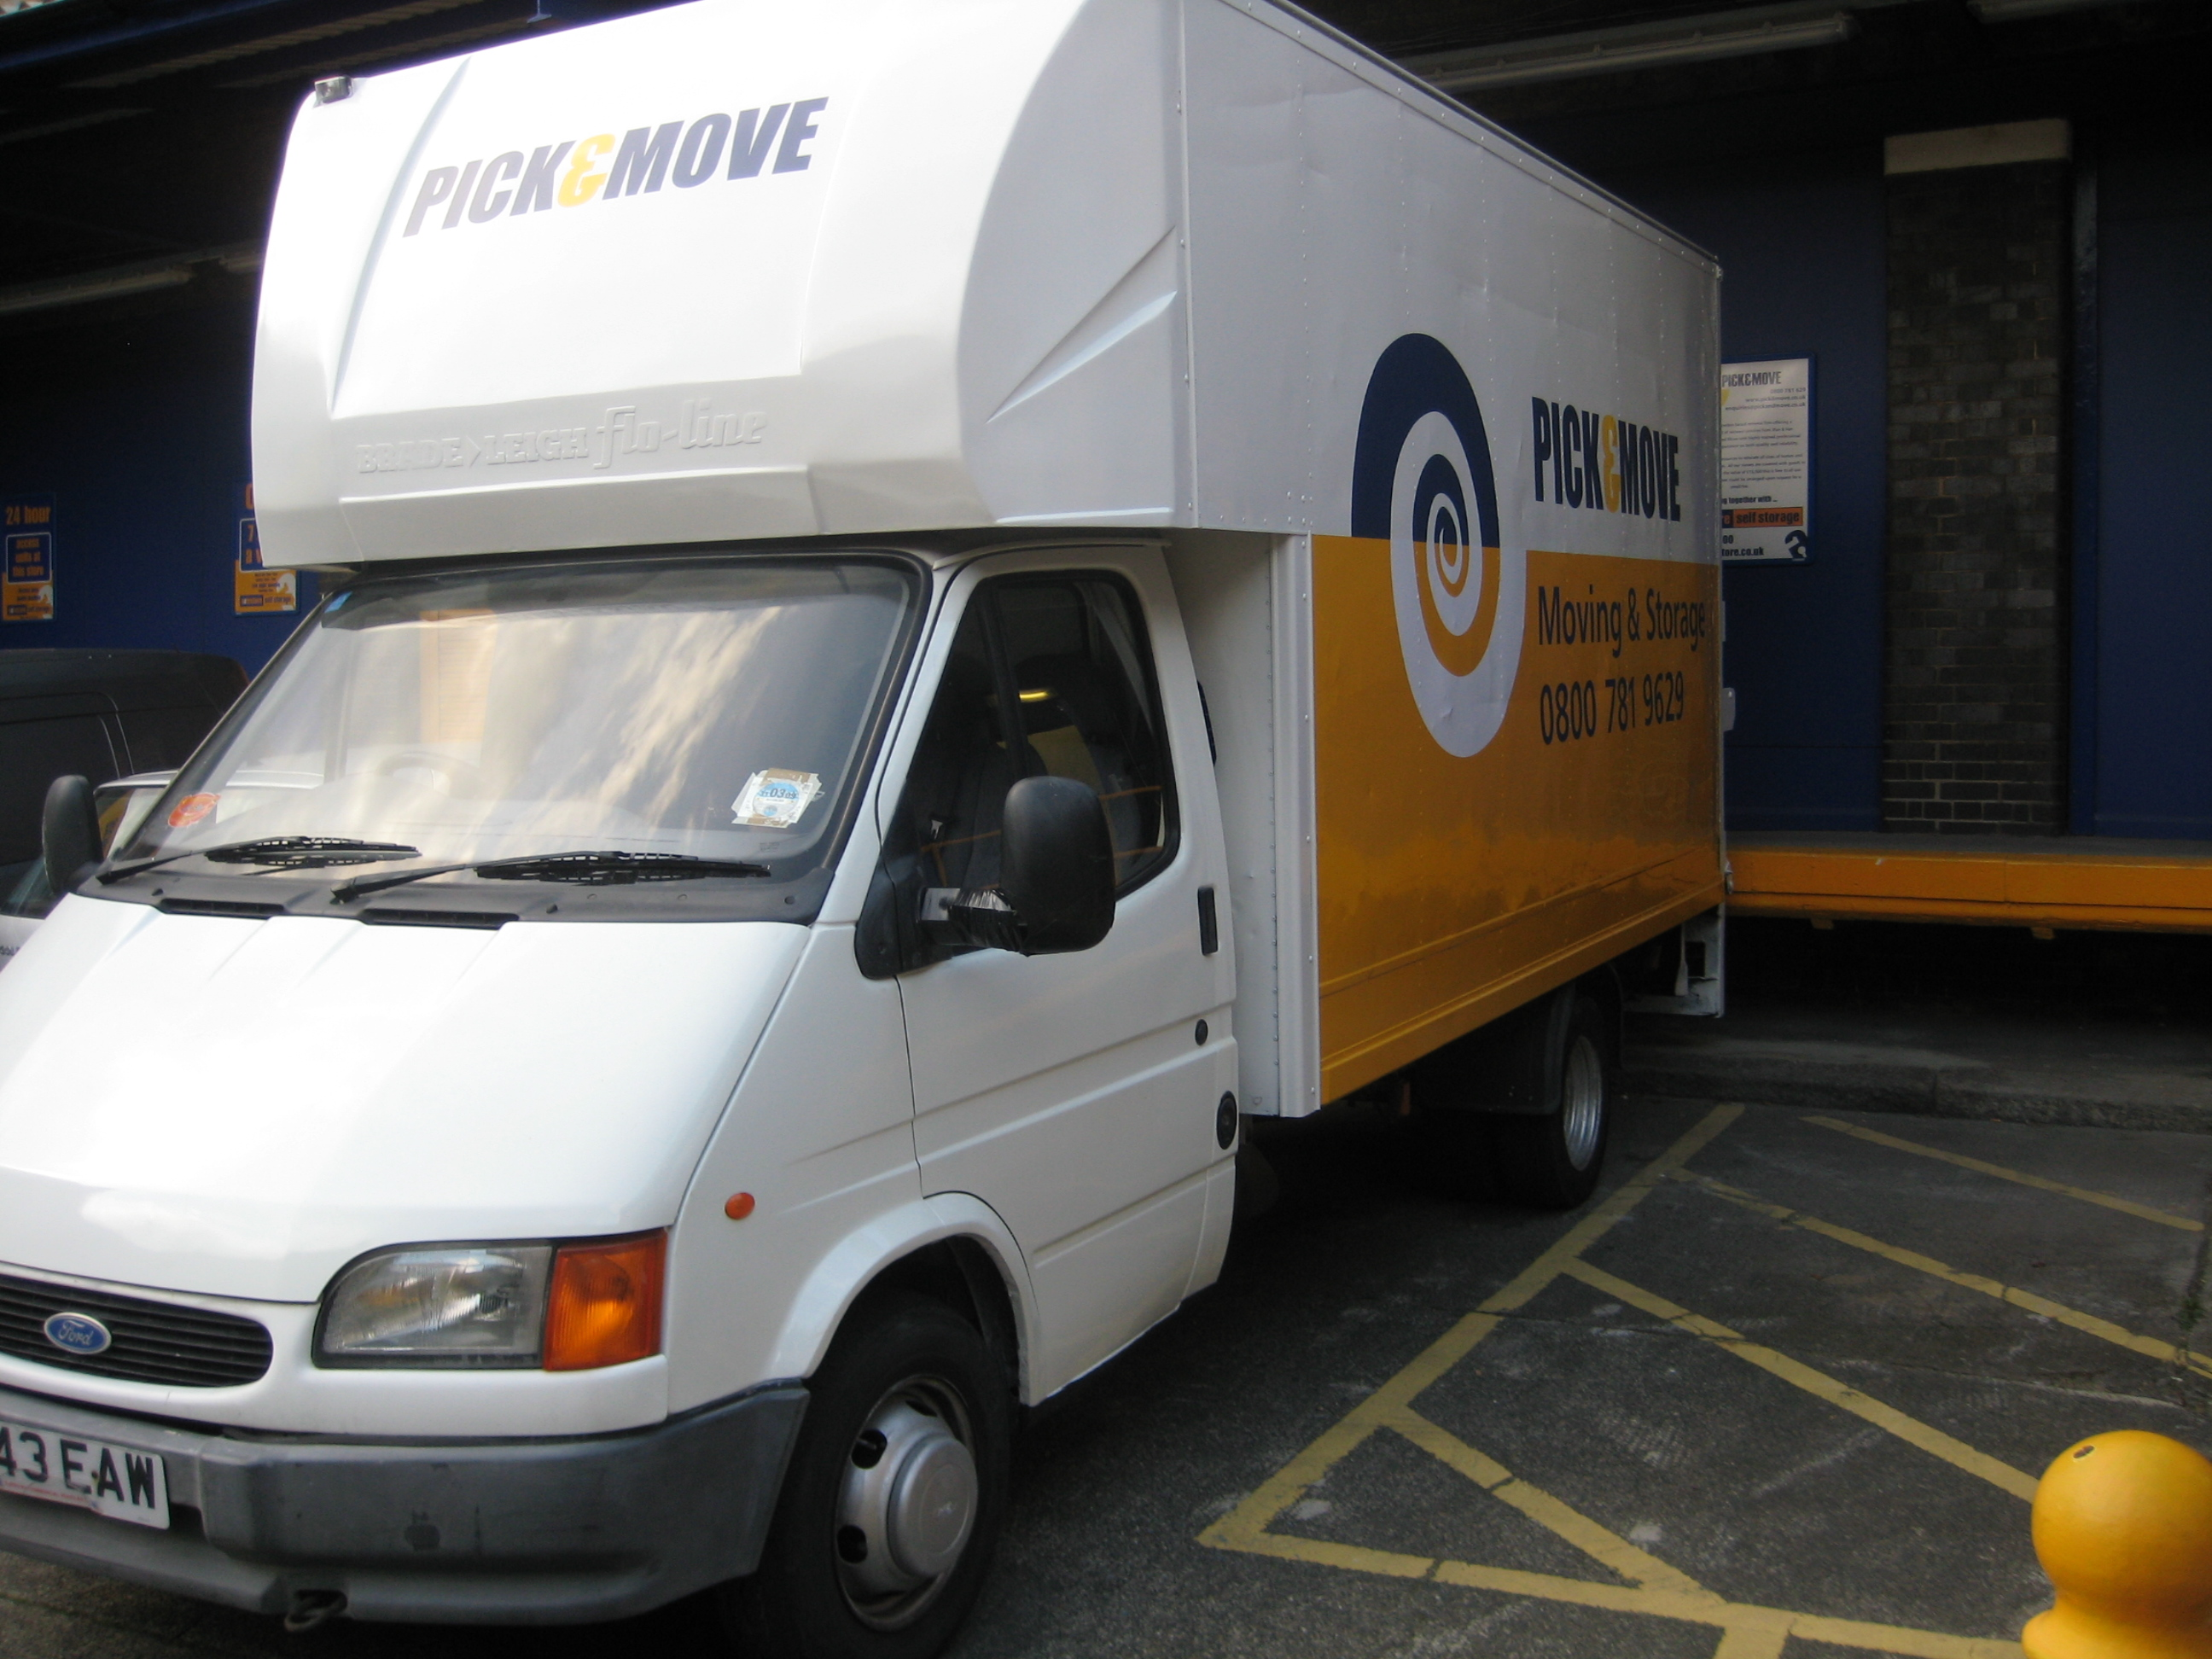 Storage Unit Removal and Clearance Services In London